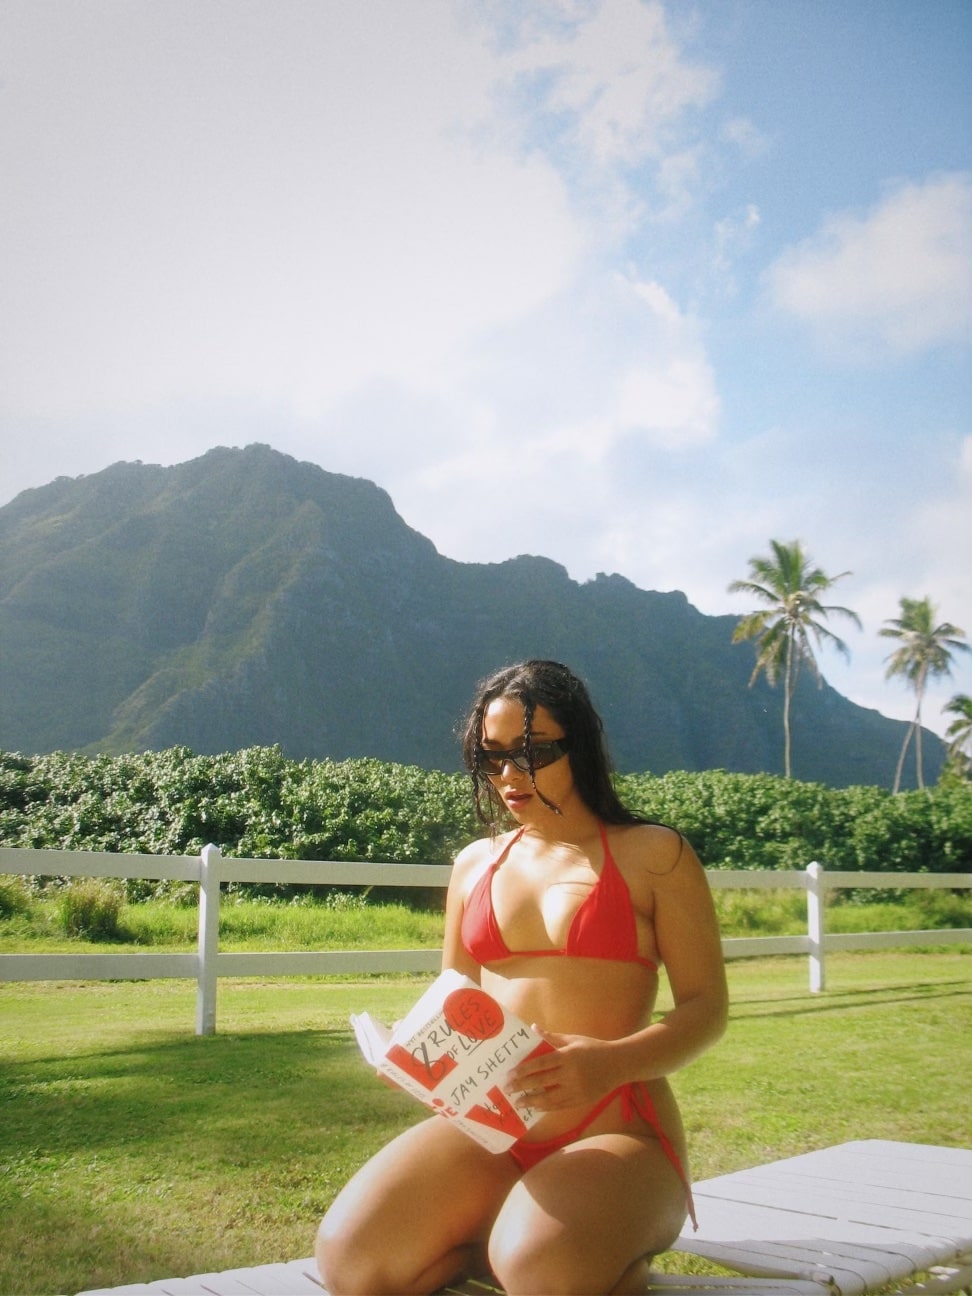 Girl sitting on white lawn chair in red bikini reading book with mountain and palm tree back drop